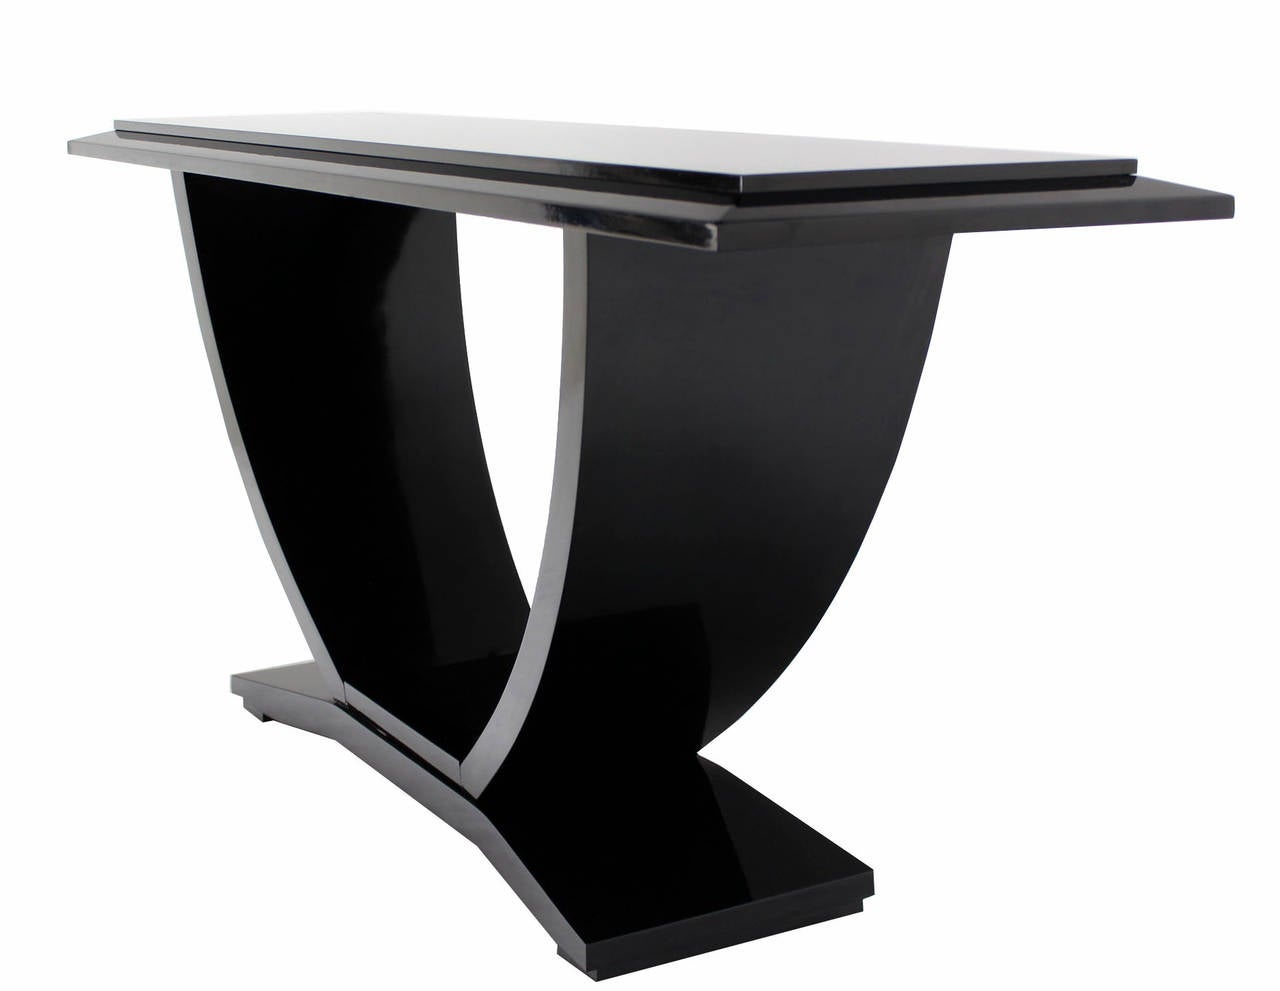 Very nice black lacquer console by Drexel.